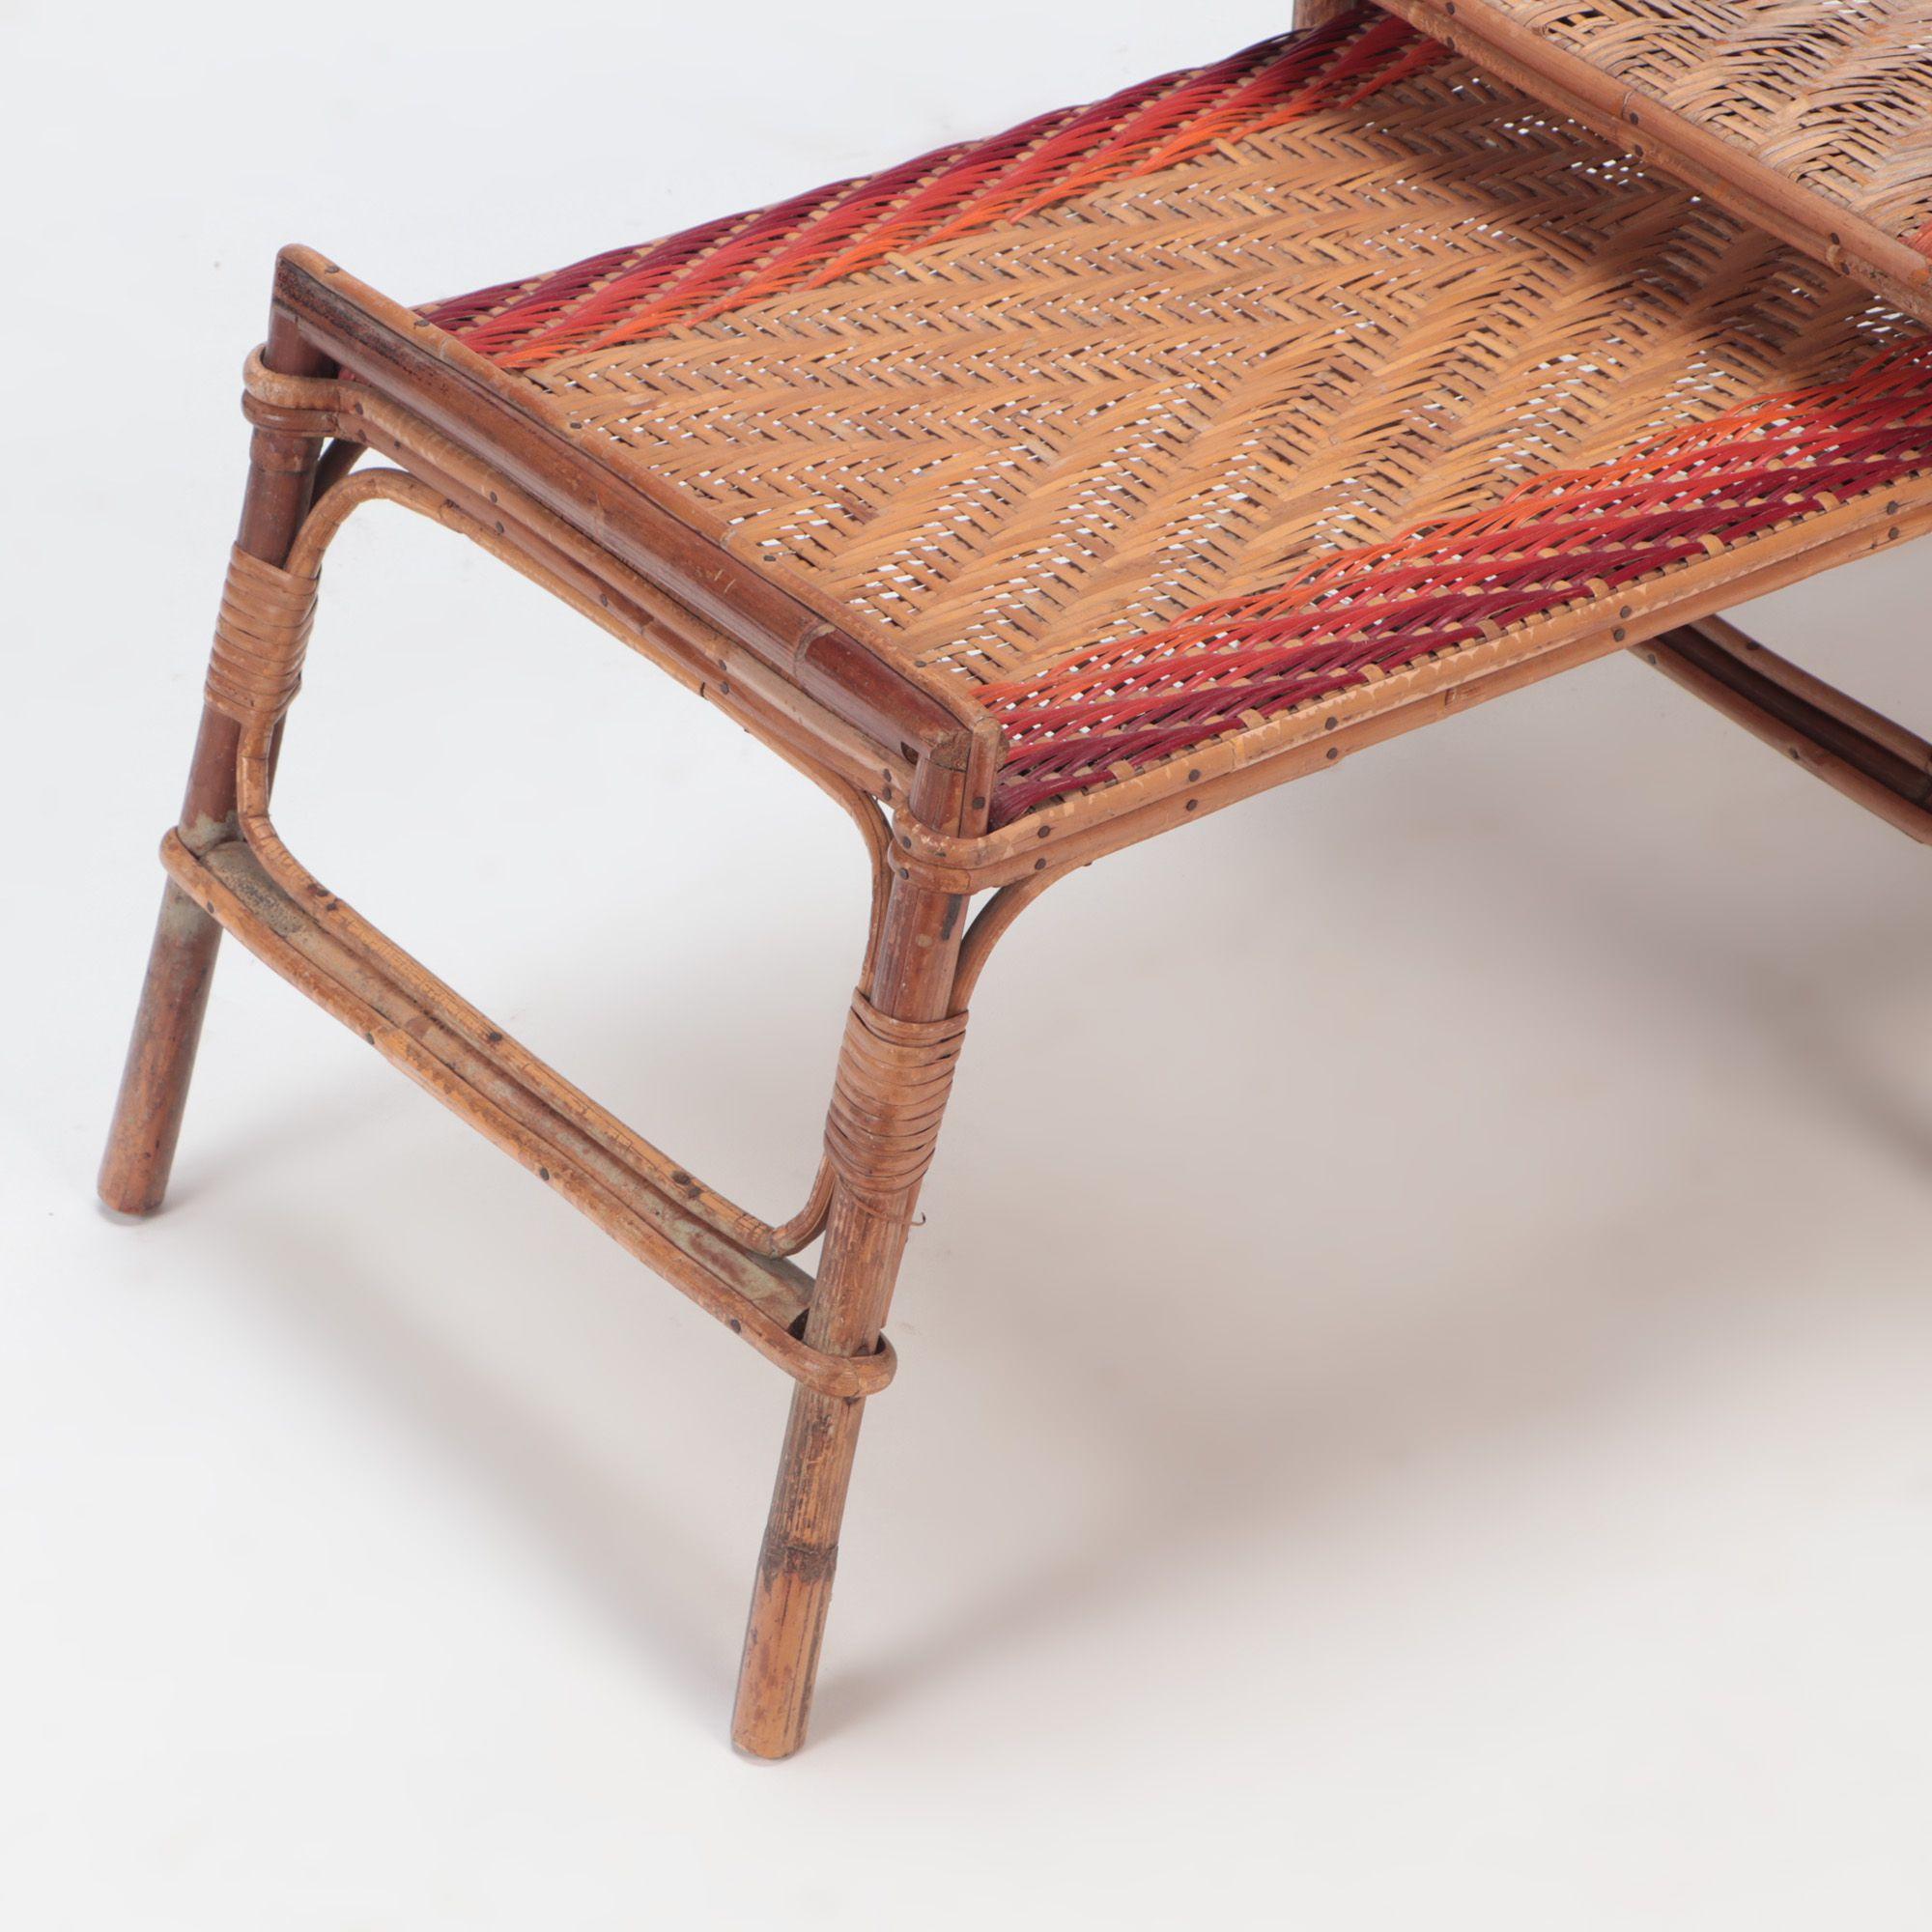 French Rattan Chaise Longue with Orange and Red Stripes, circa 1900 For Sale 1